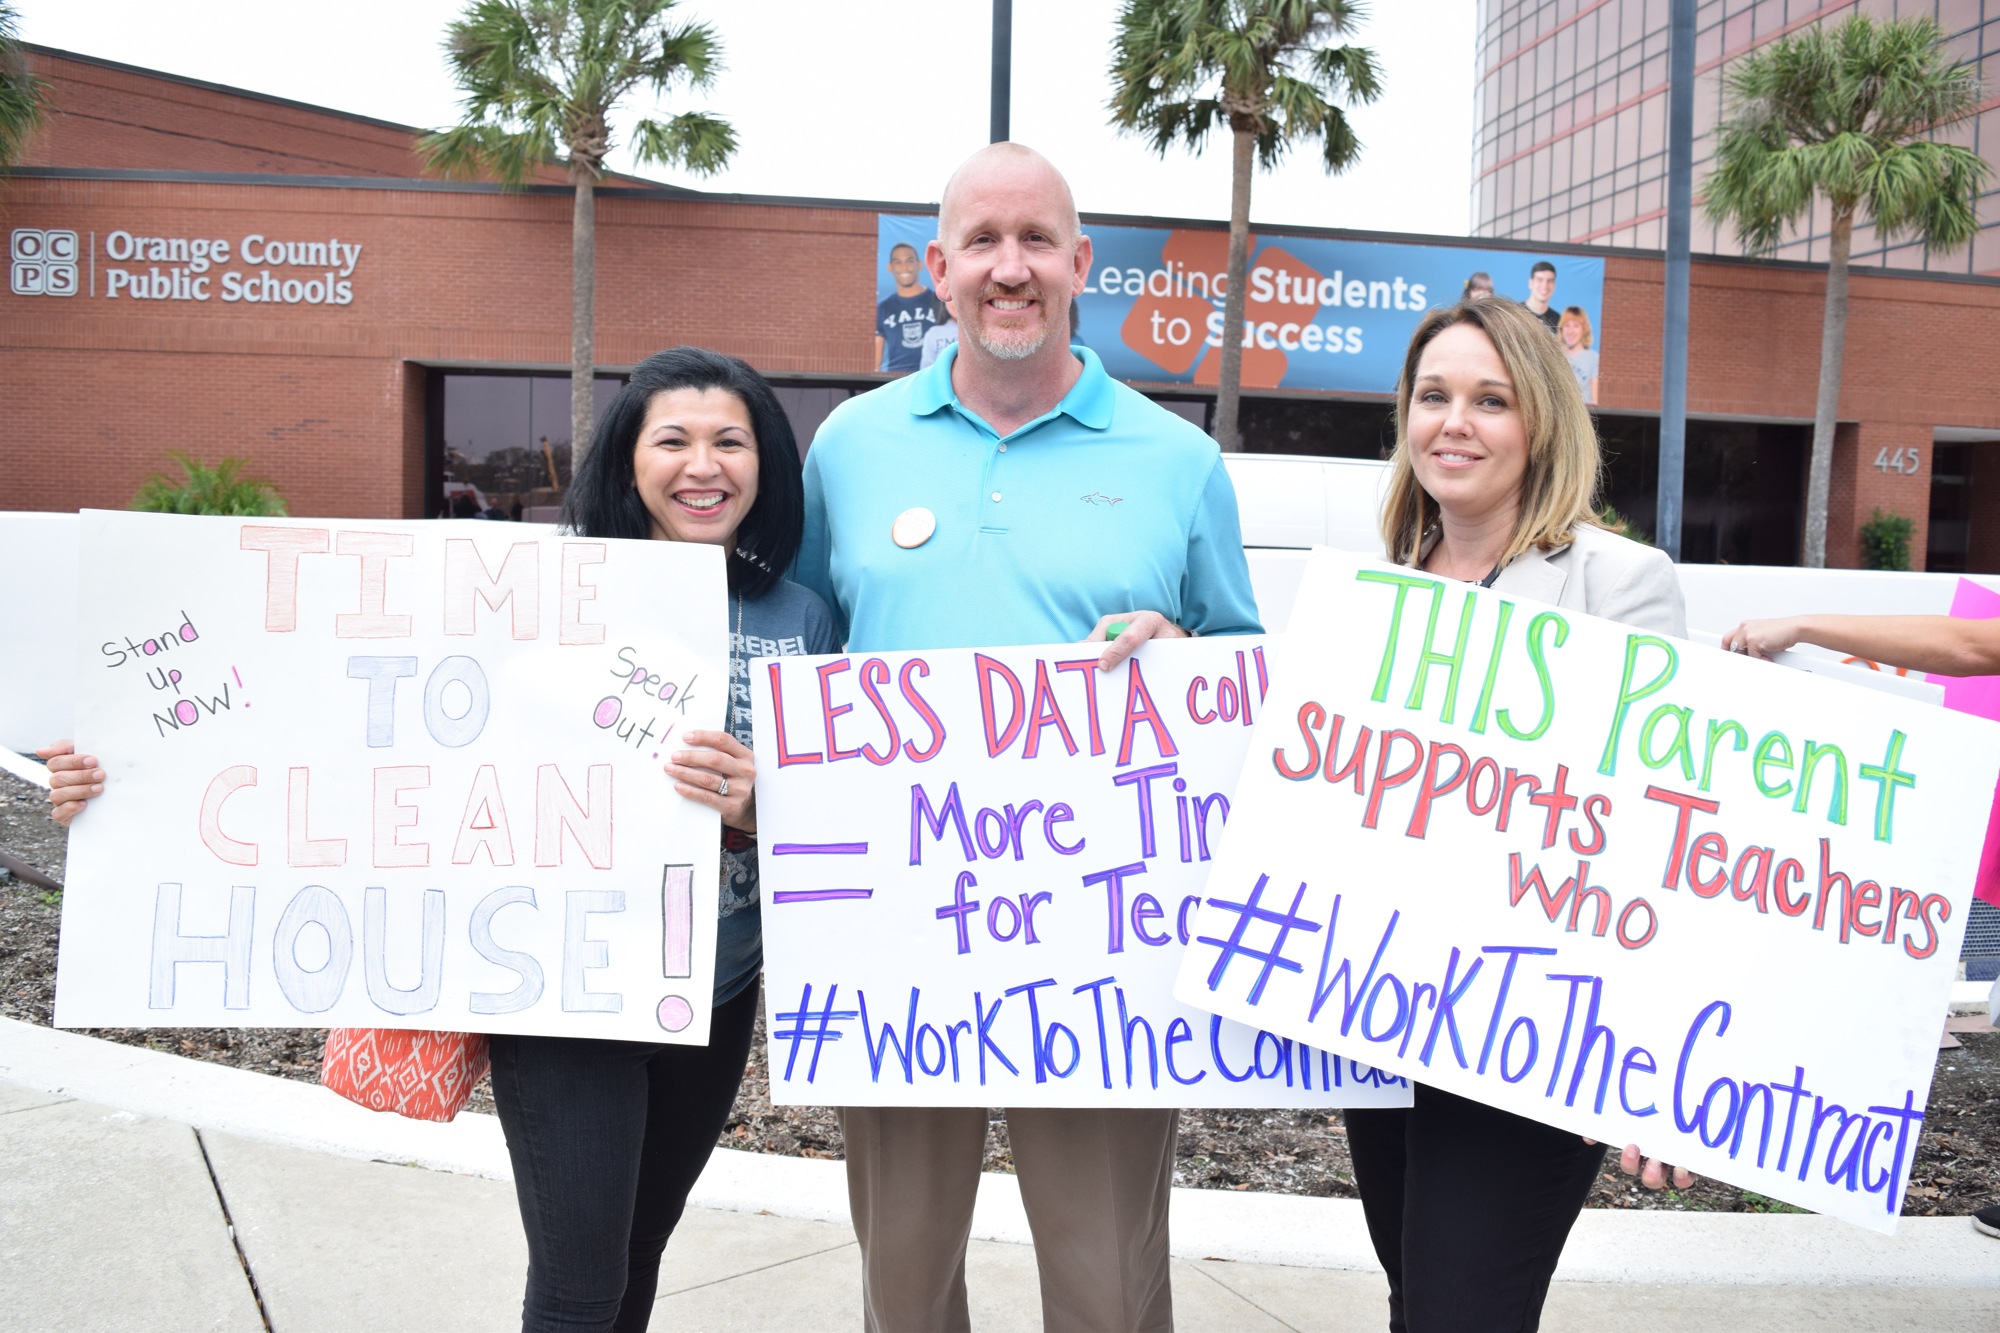 Parent Daisy Mitchell, District 7 School Board candidate Eric Schwalbach and education activist Heather Mellet were part of the demonstration.